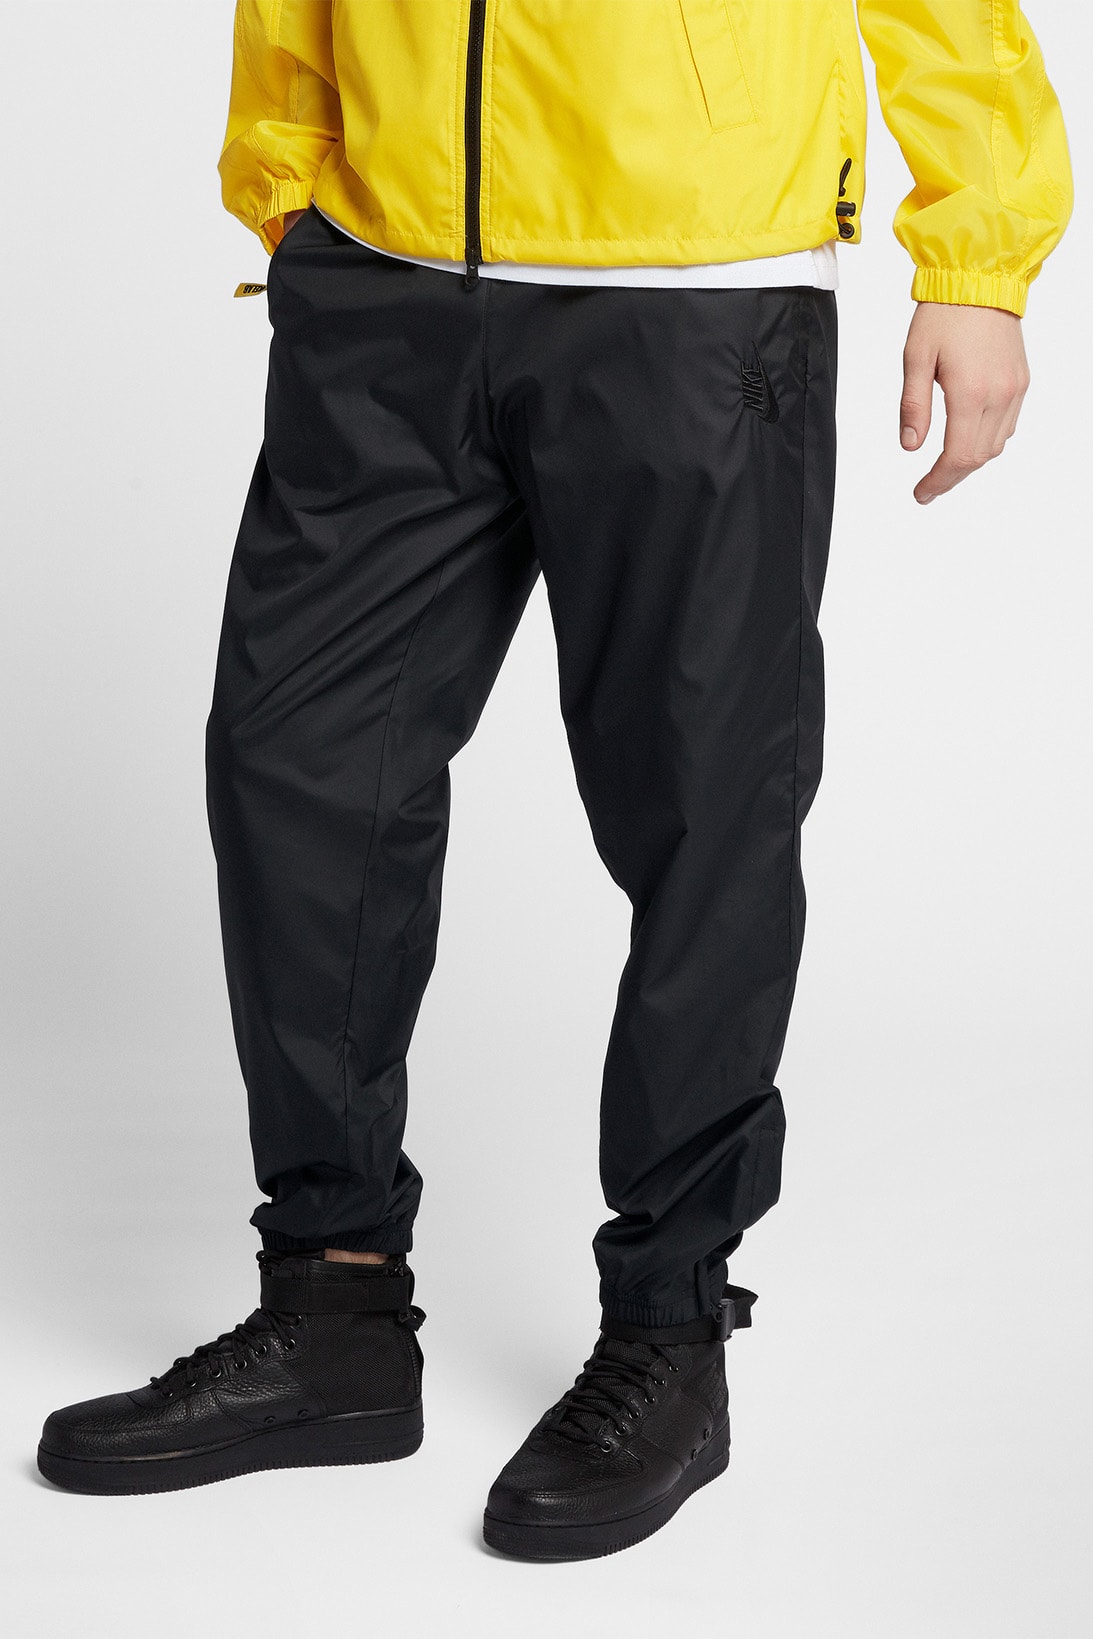 NikeLab Spring 2018 Apparel Collection 2018 february 26 release date info jacket pants